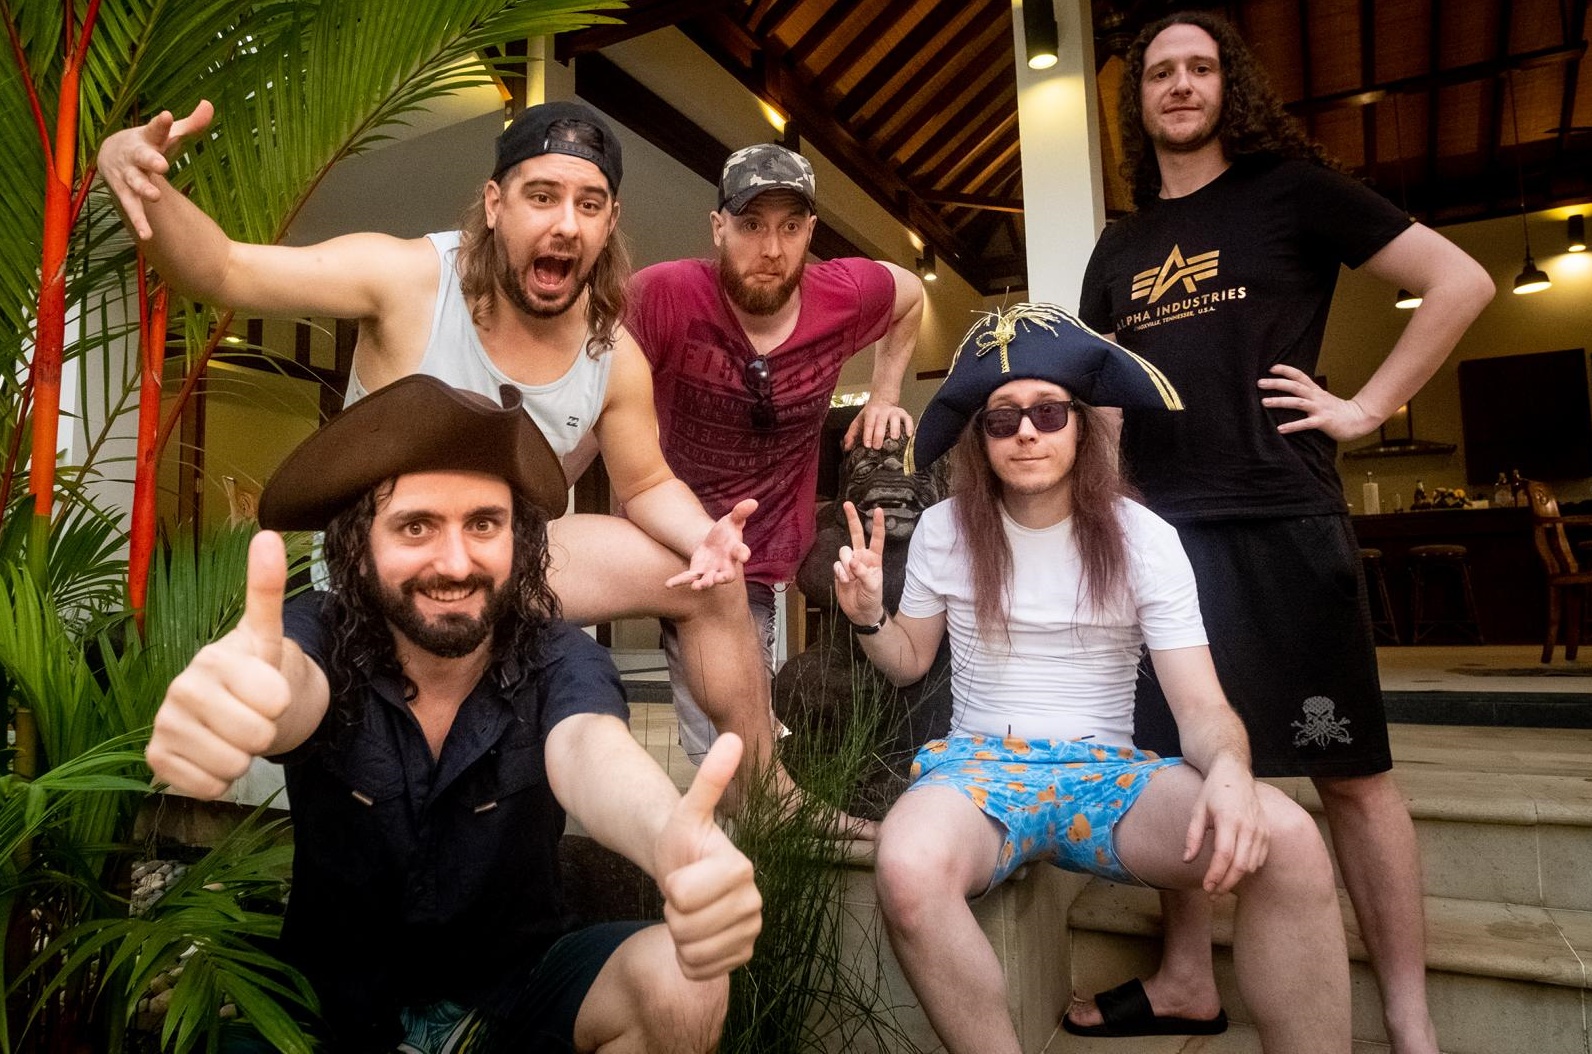 145287-alestorm-announce-official-new-album-titlecurse-of-the-crystal-coconut-and-recording-details.jpg